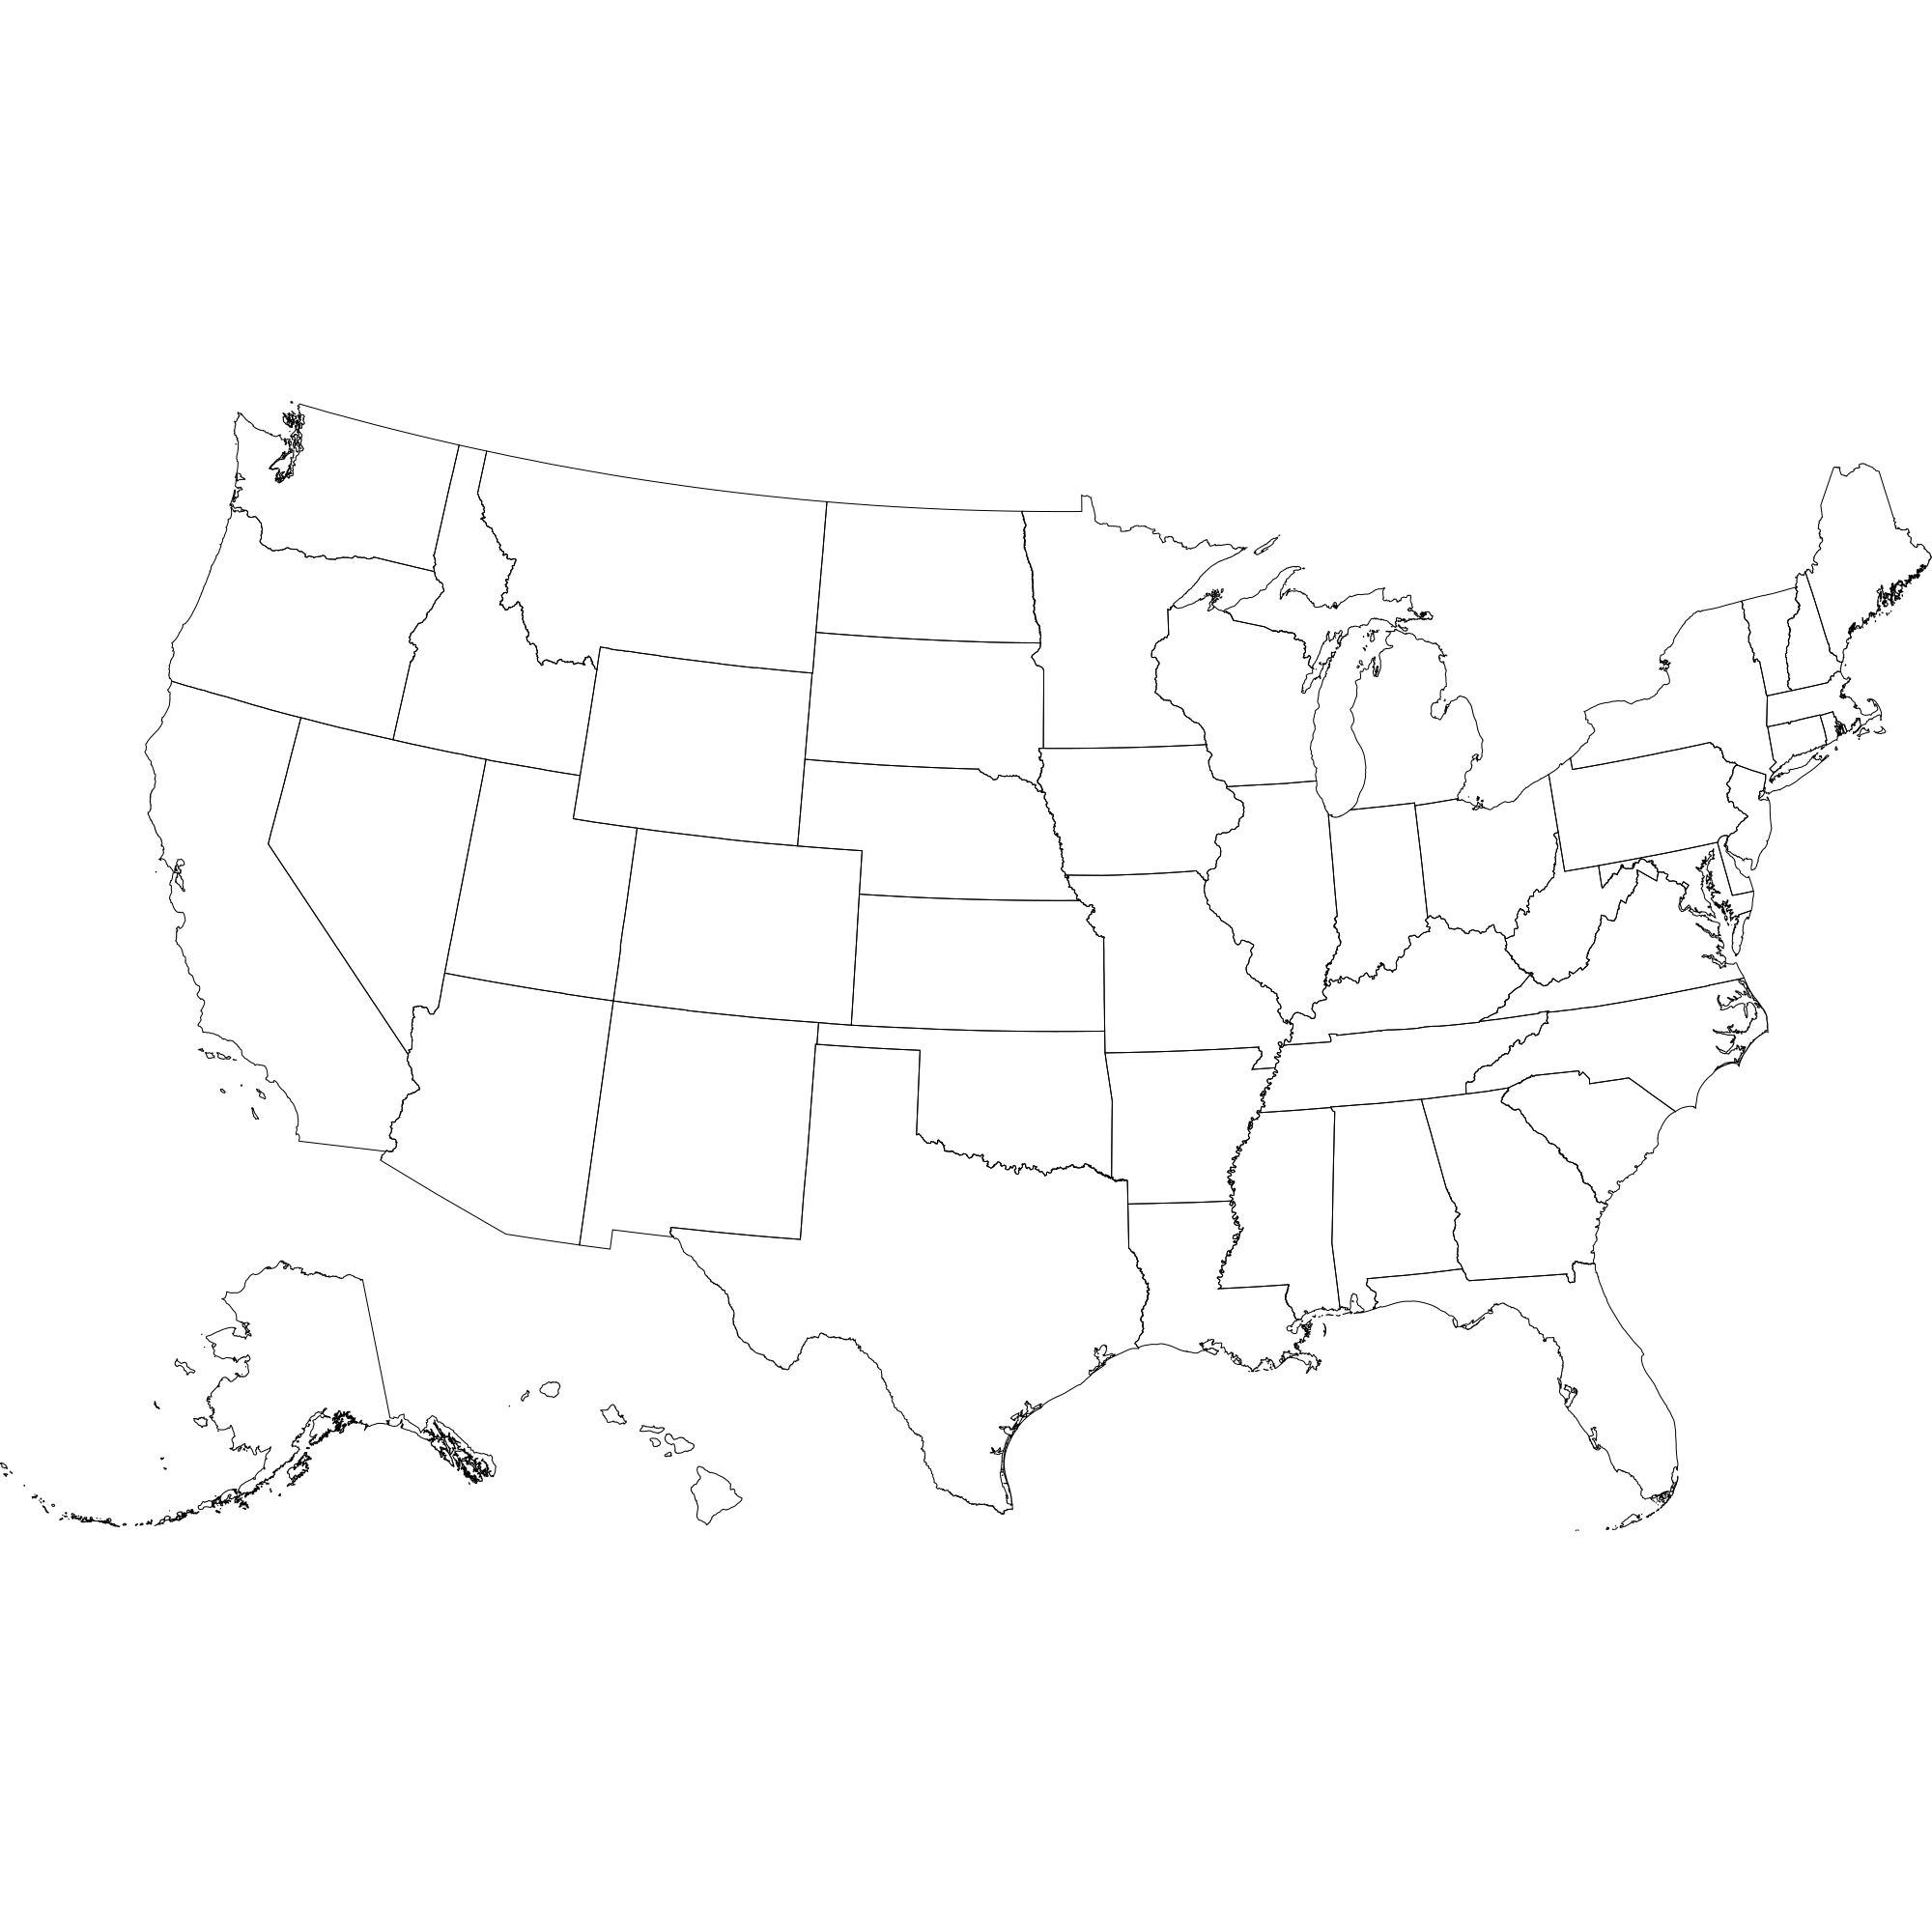 Basic Political Map with black borders separating zip codes